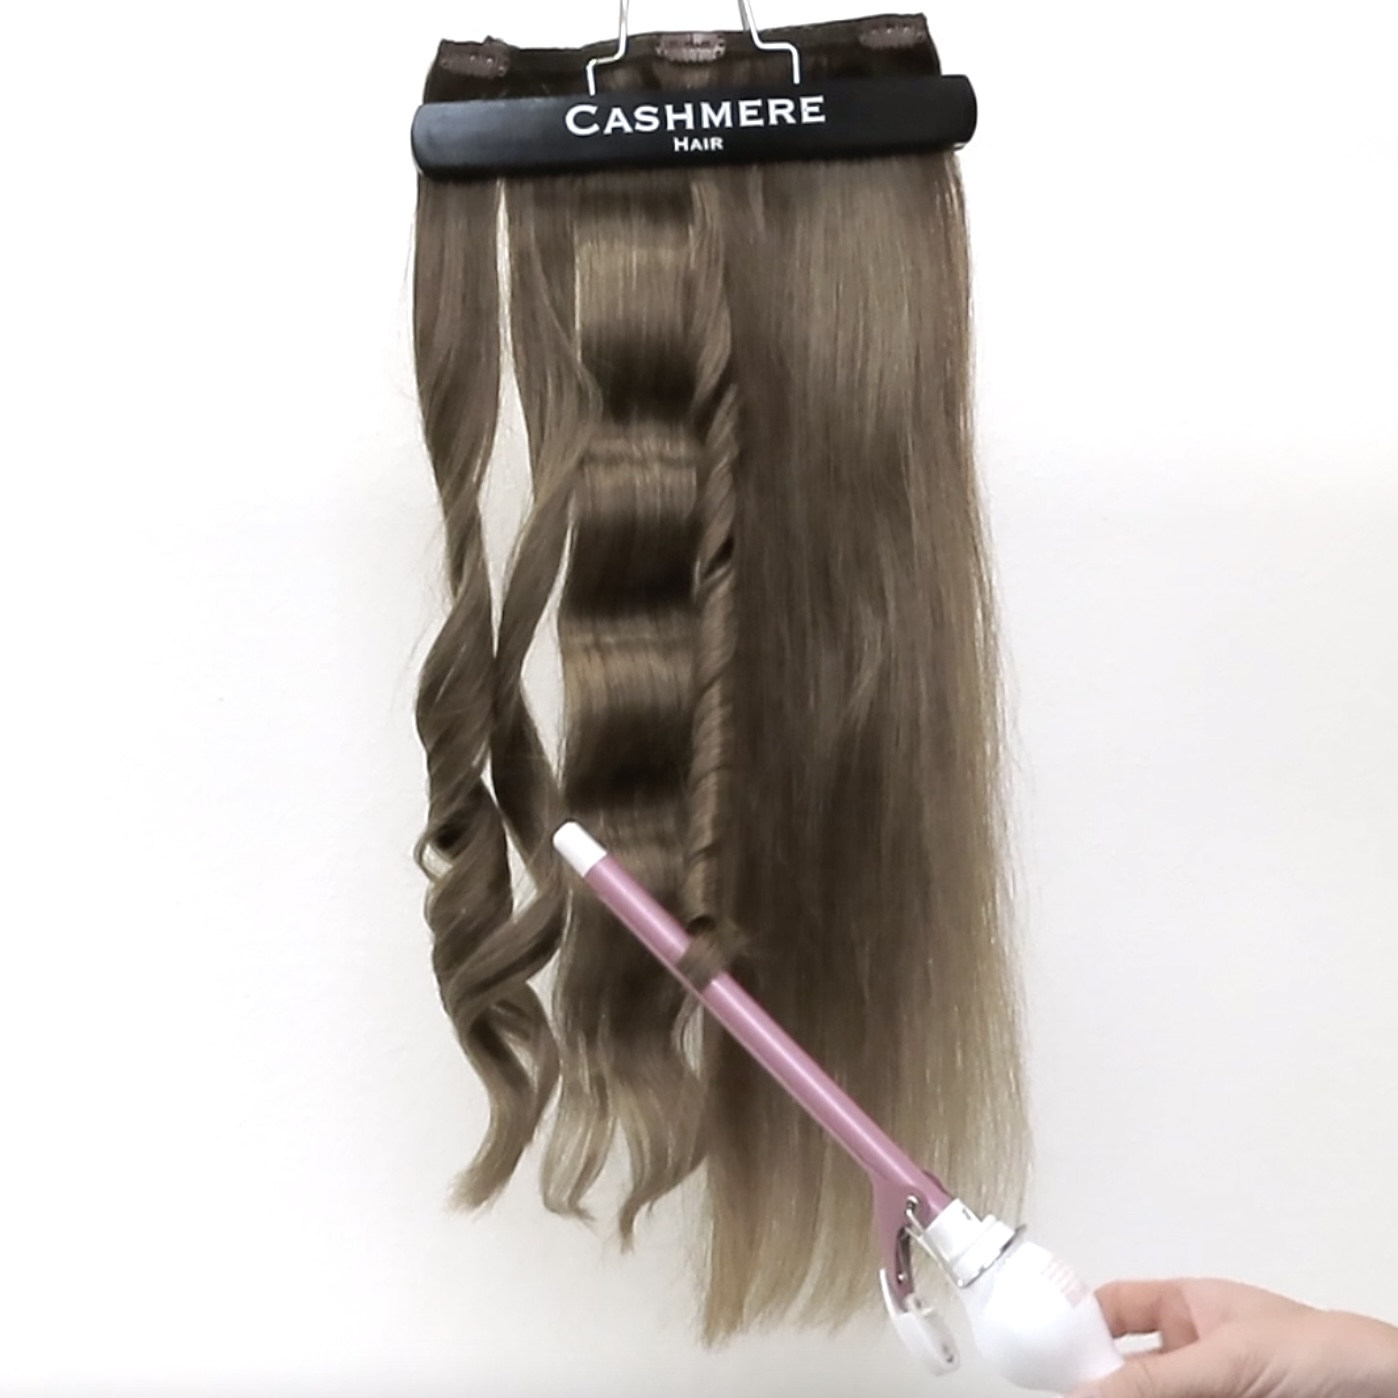 curling ends of hair with mini curling iron